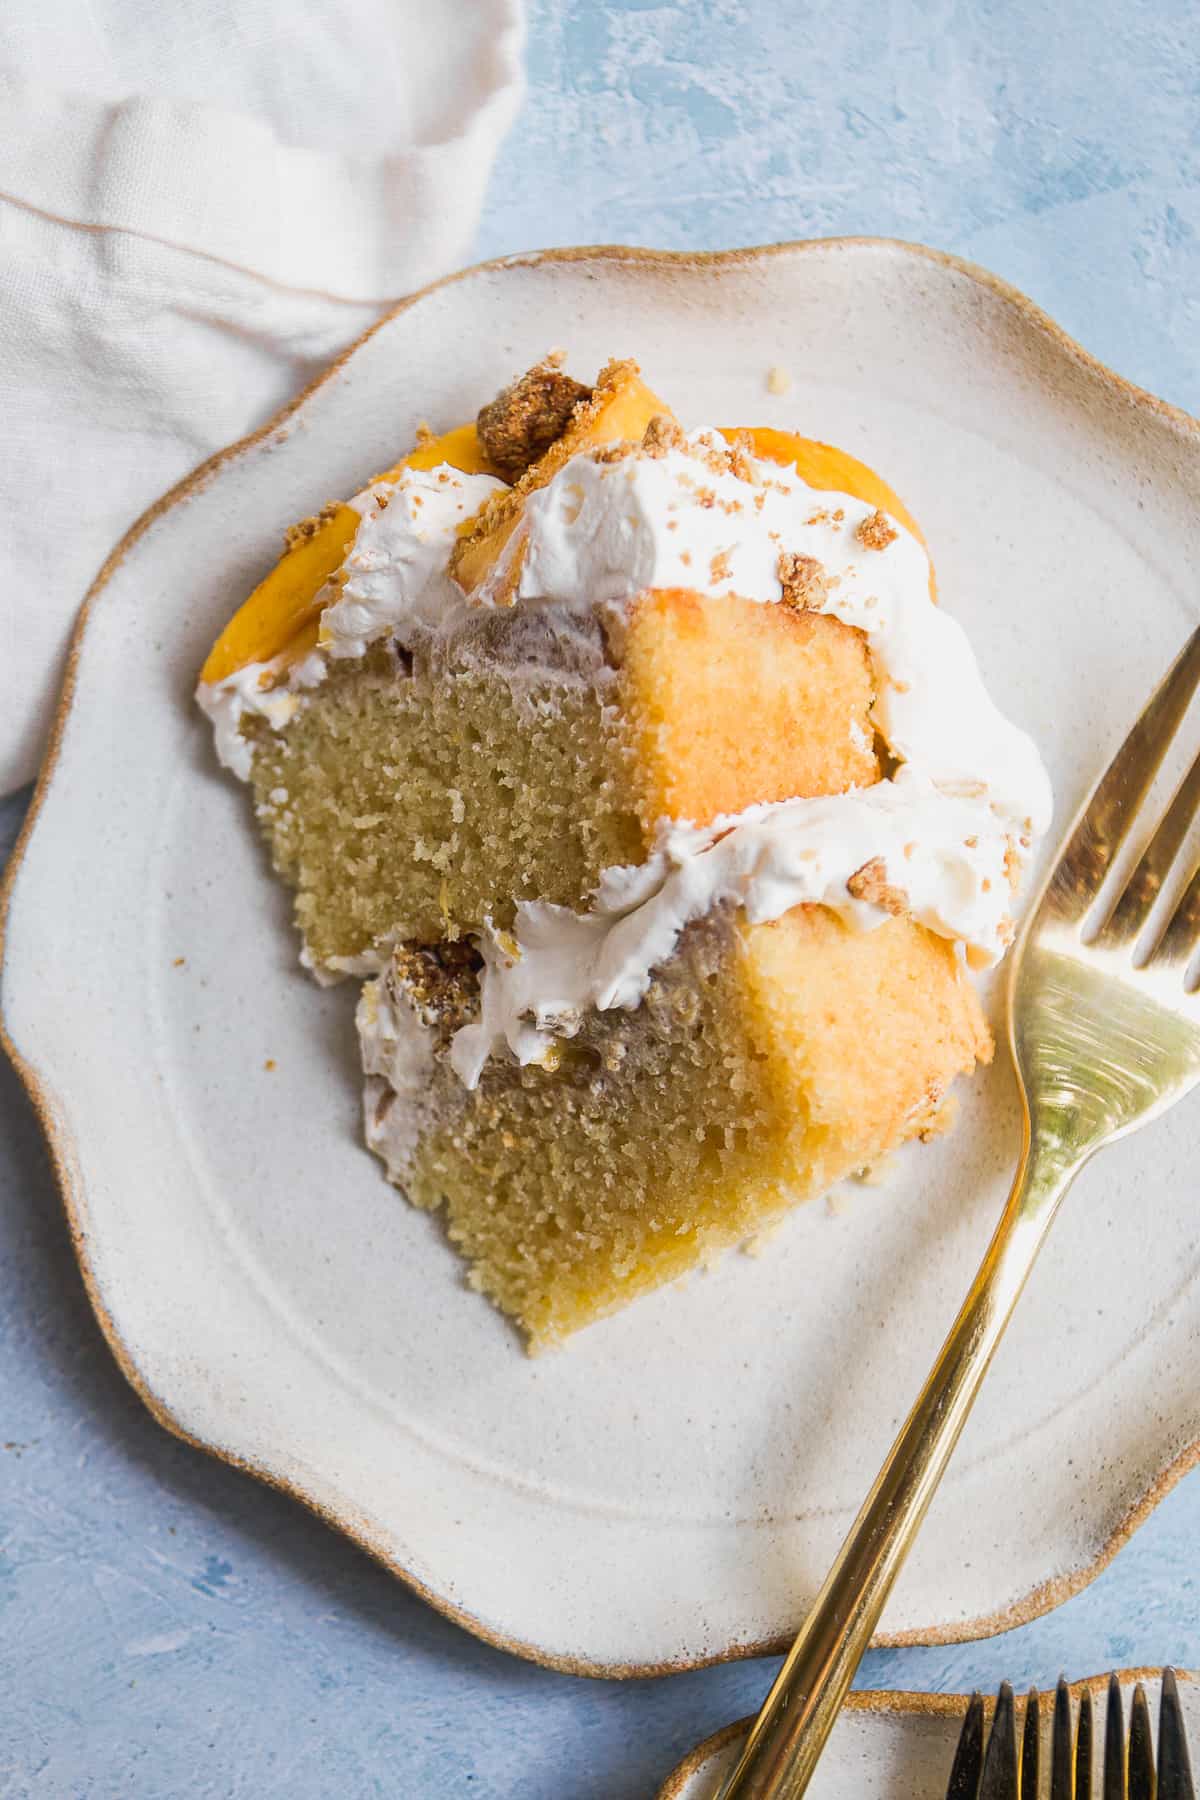 A slice of peach cobbler pound cake on a plate with a gold fork.